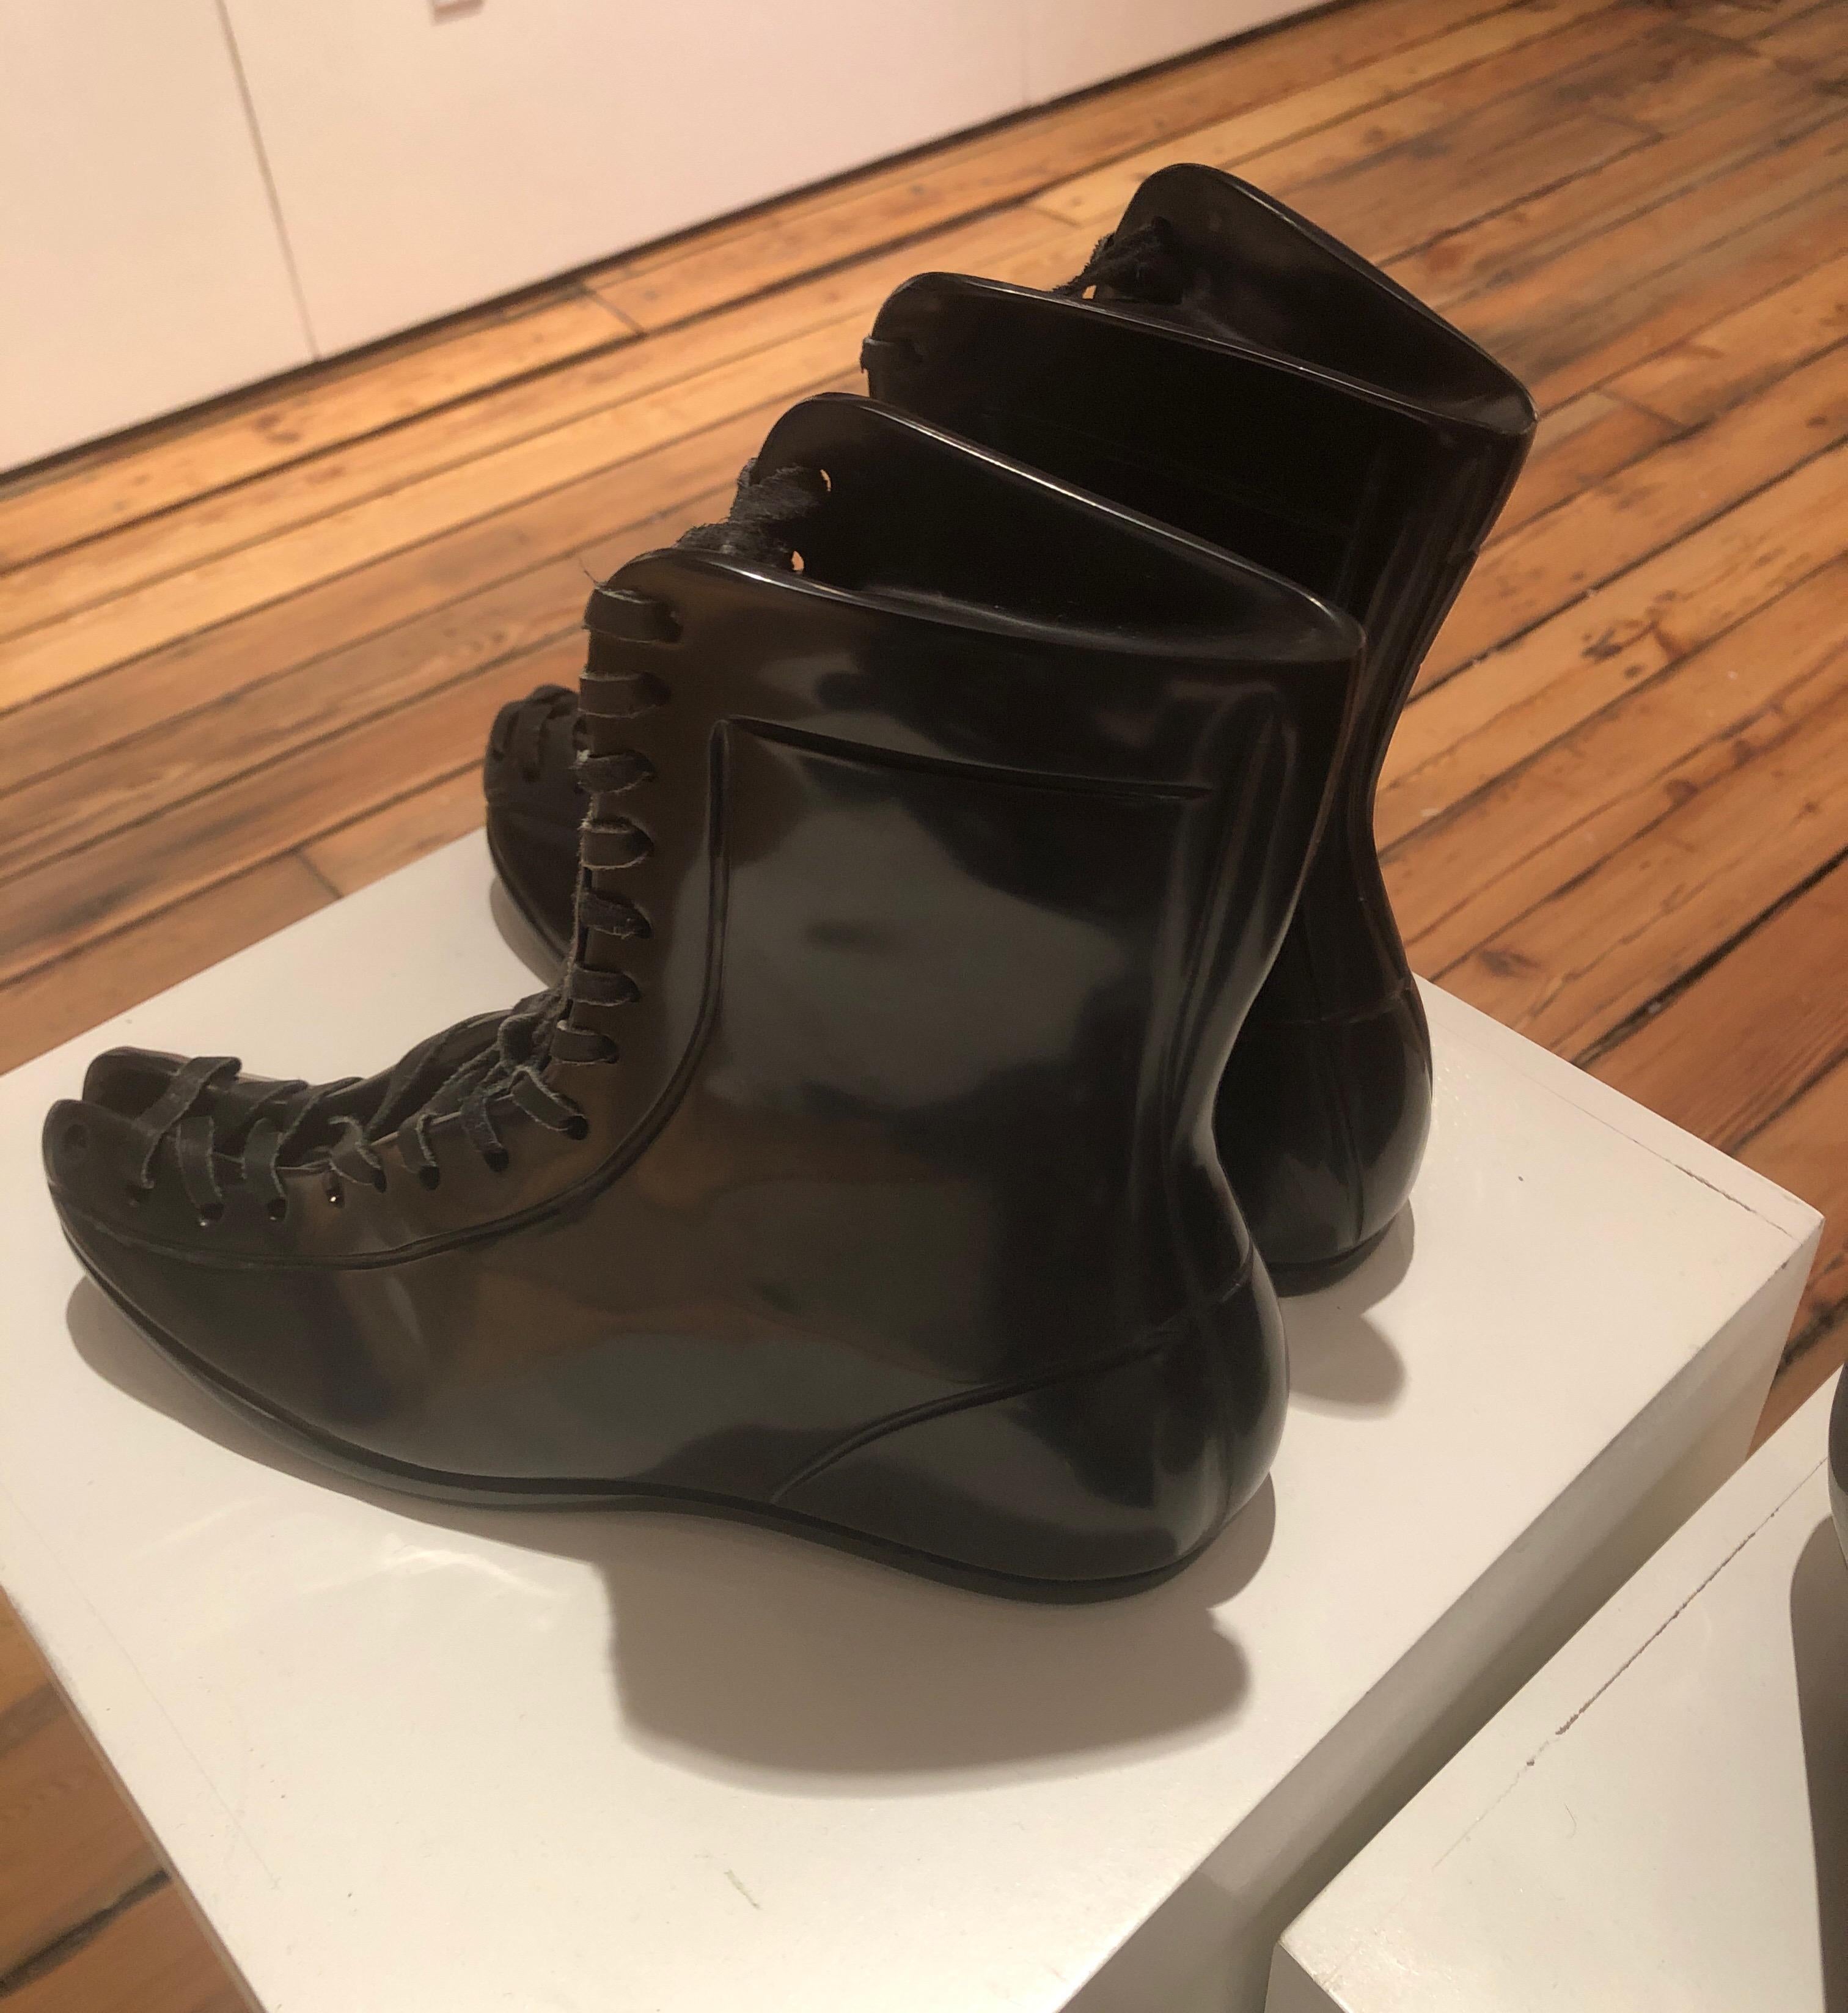 Boxing Boots by KARTEL unique hand carved black marble sculpture smooth finish 10